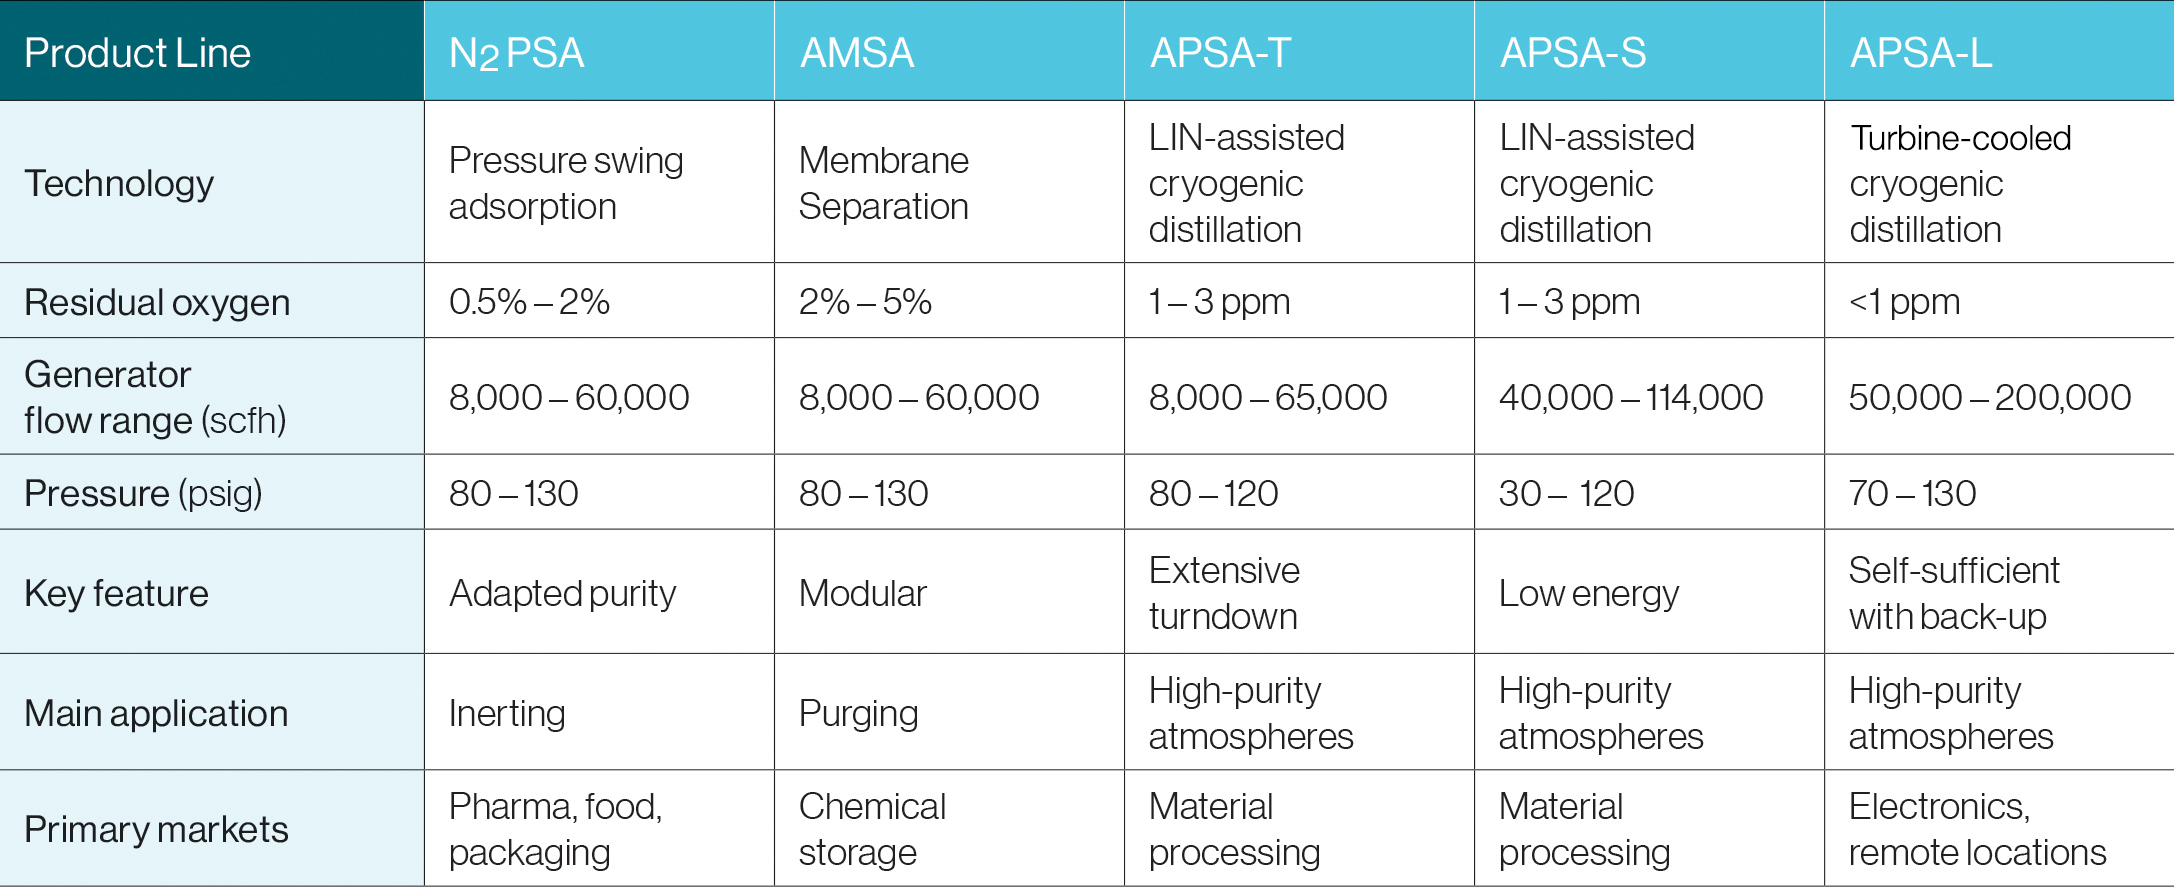 Airgas FLOXAL offers PSA, AMSA and APSA product lines for nitrogen generation.  See the chart below to understand the key features of each product line within the N2 PSA offering.